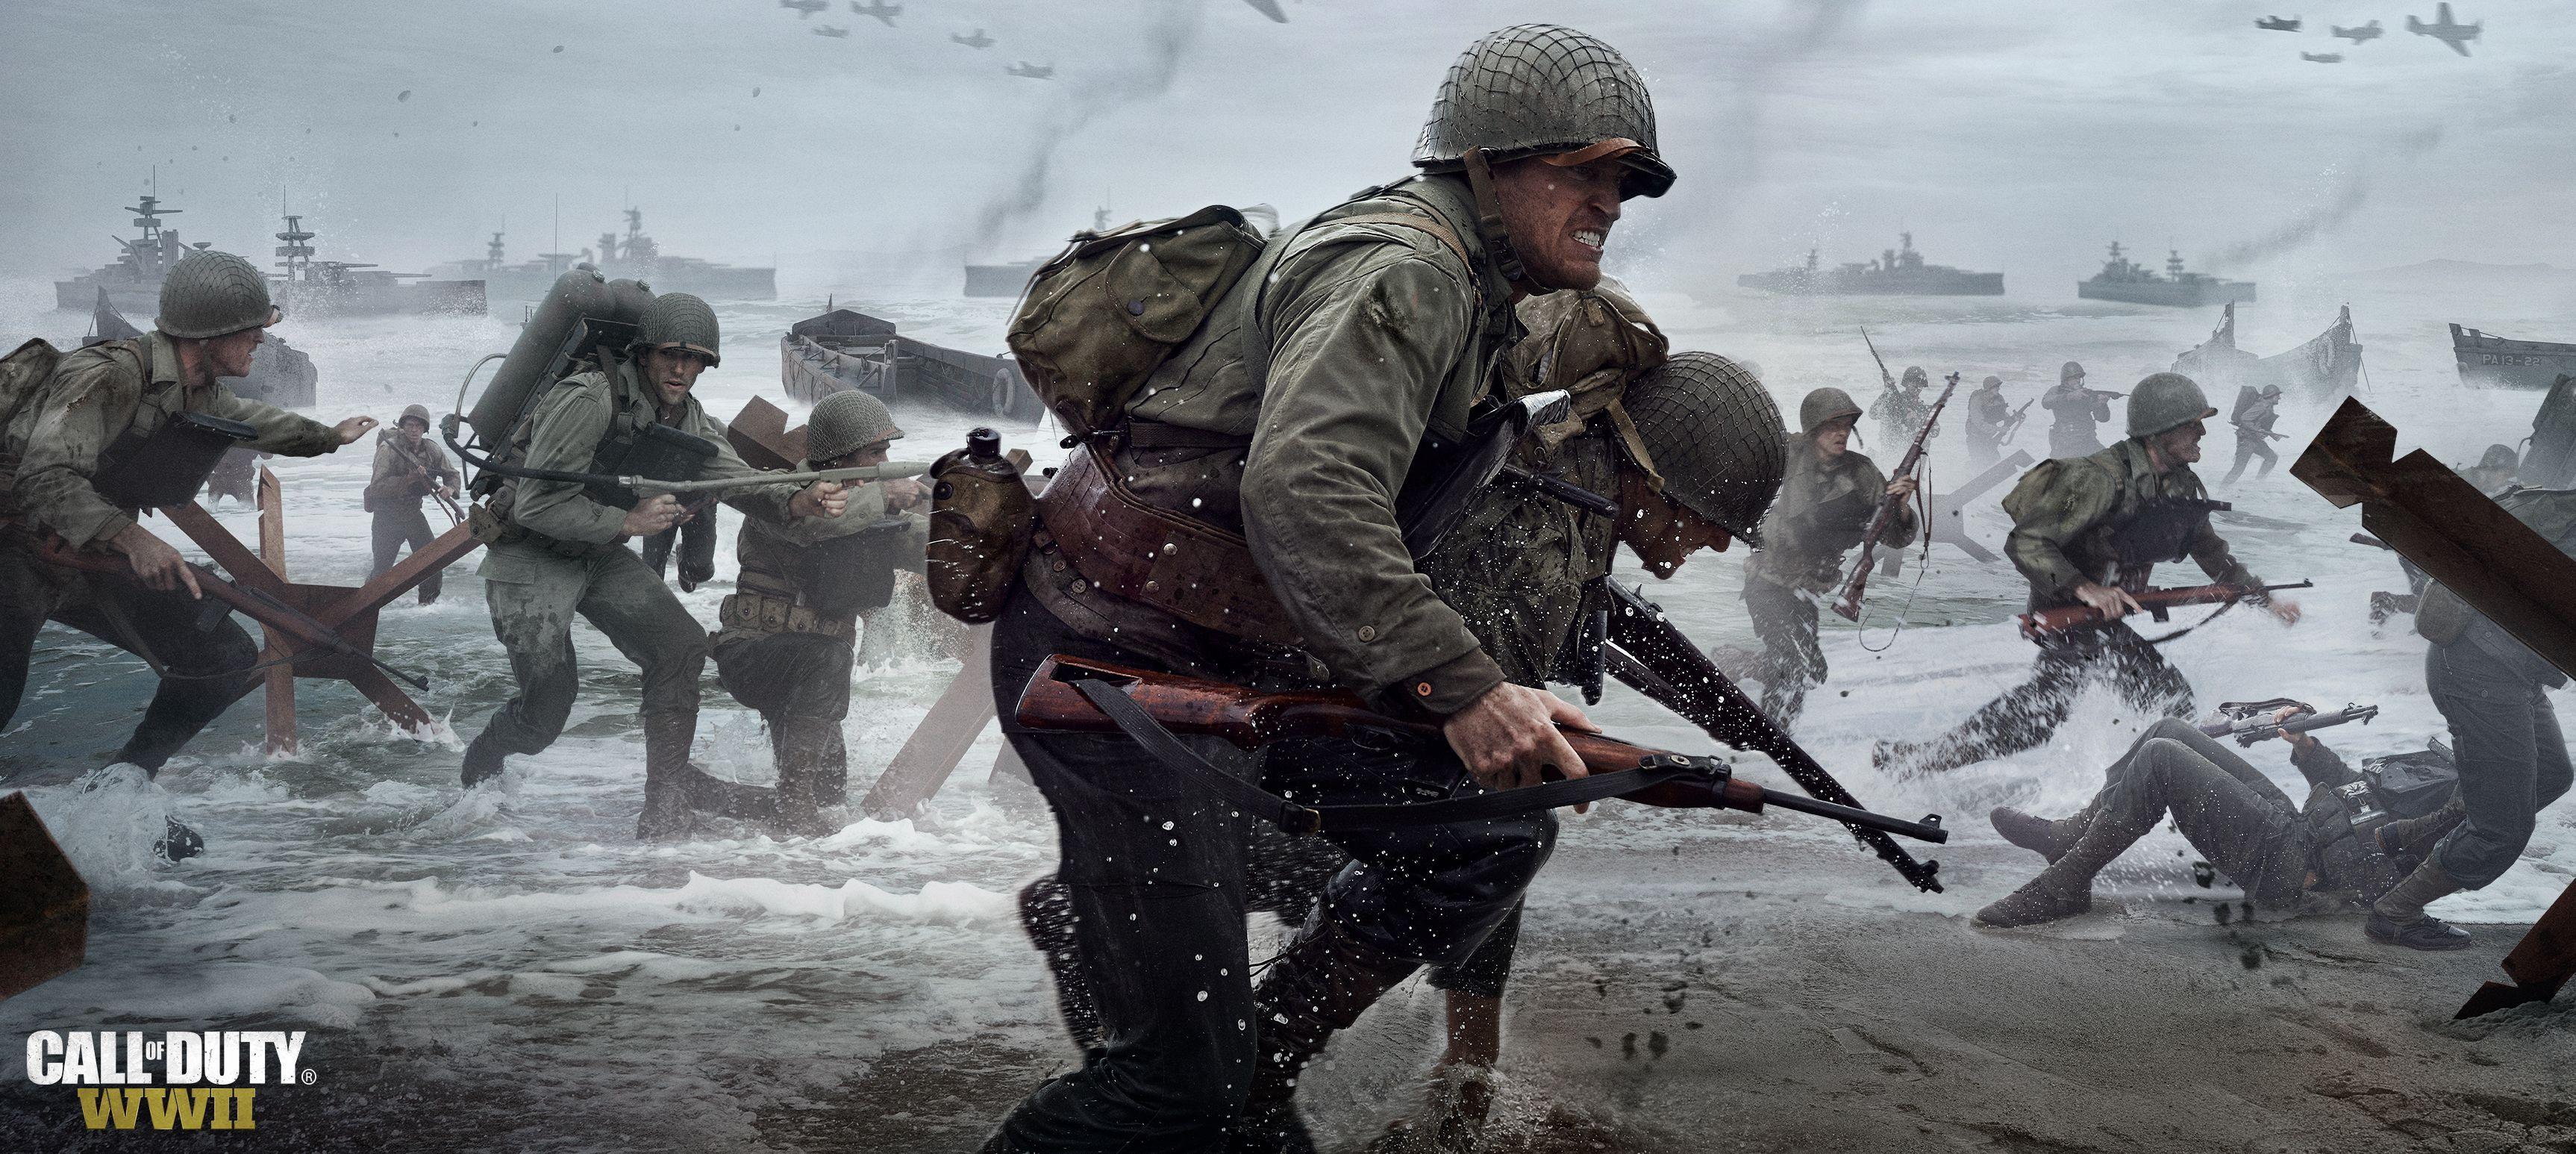 images of Call of Duty World War II